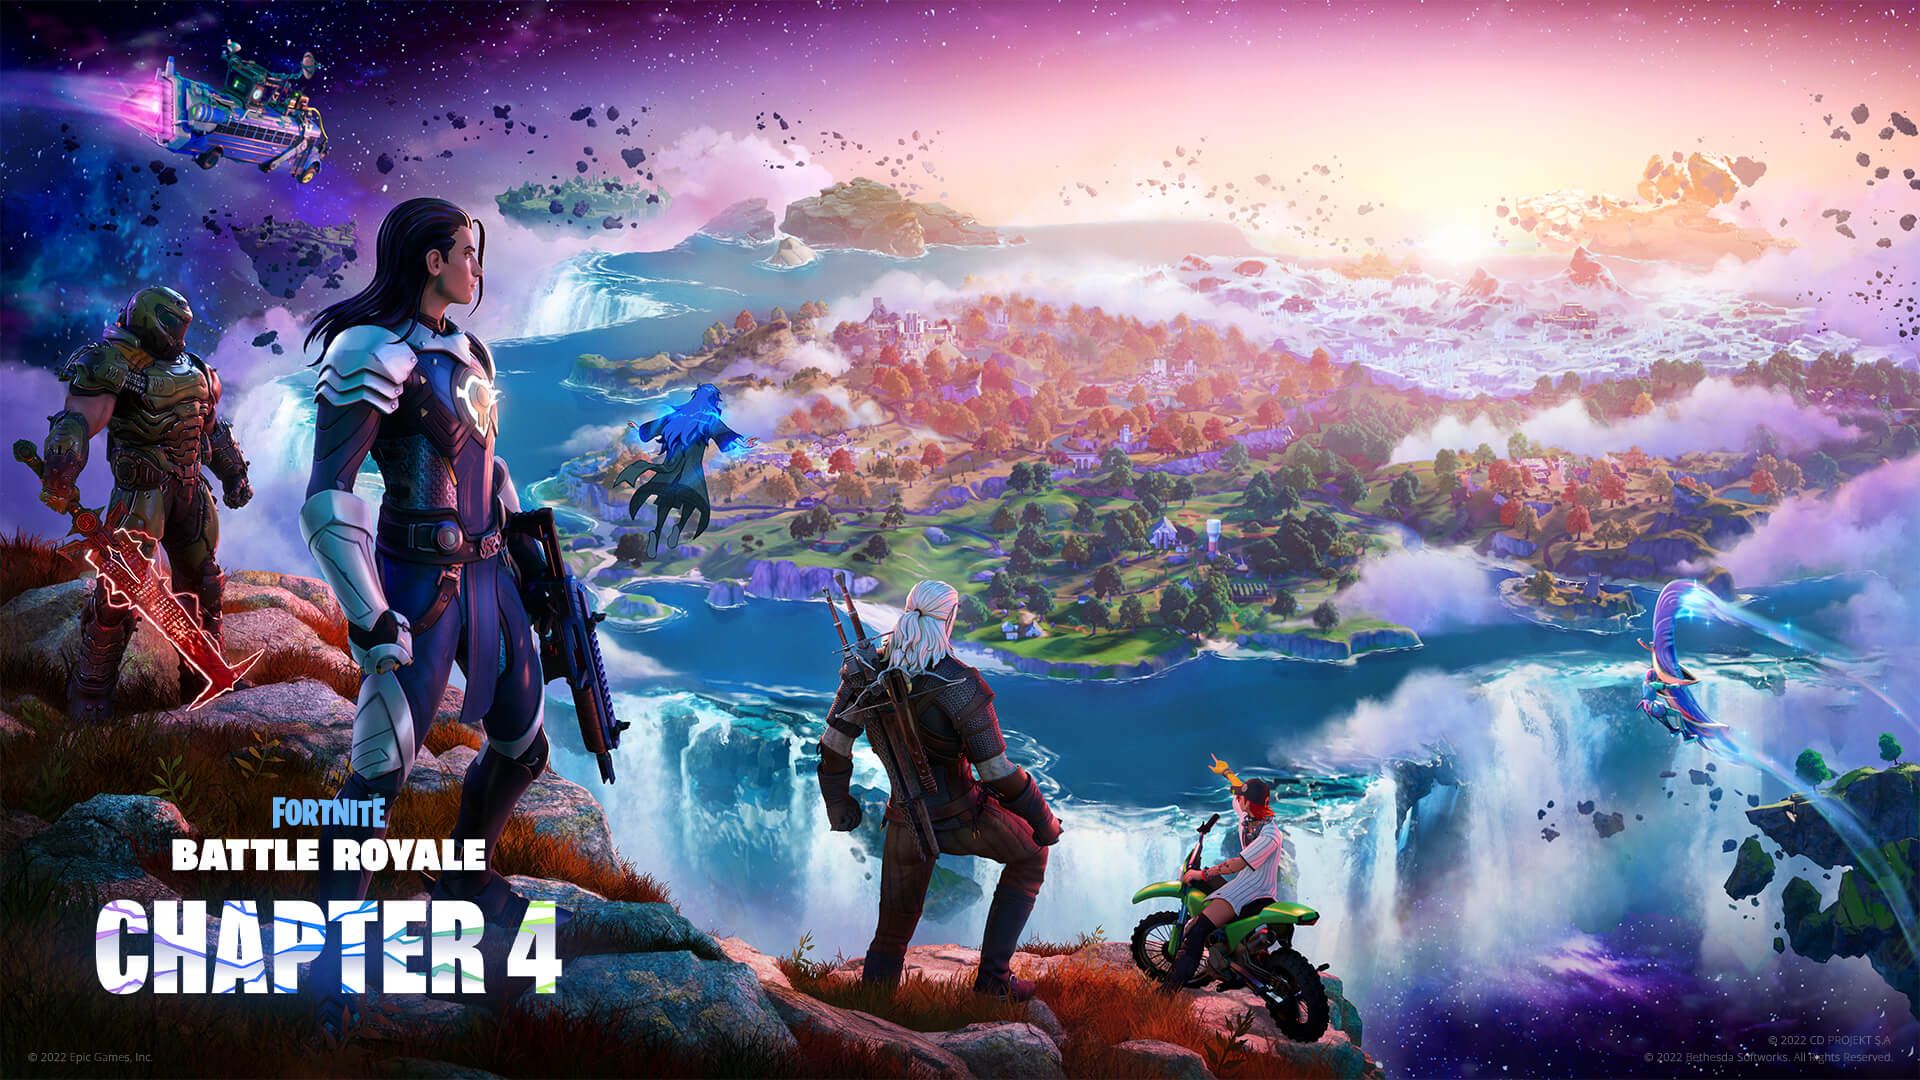 Fortnite Chapter 4 powered by Unreal Engine 5.1 looks truly next